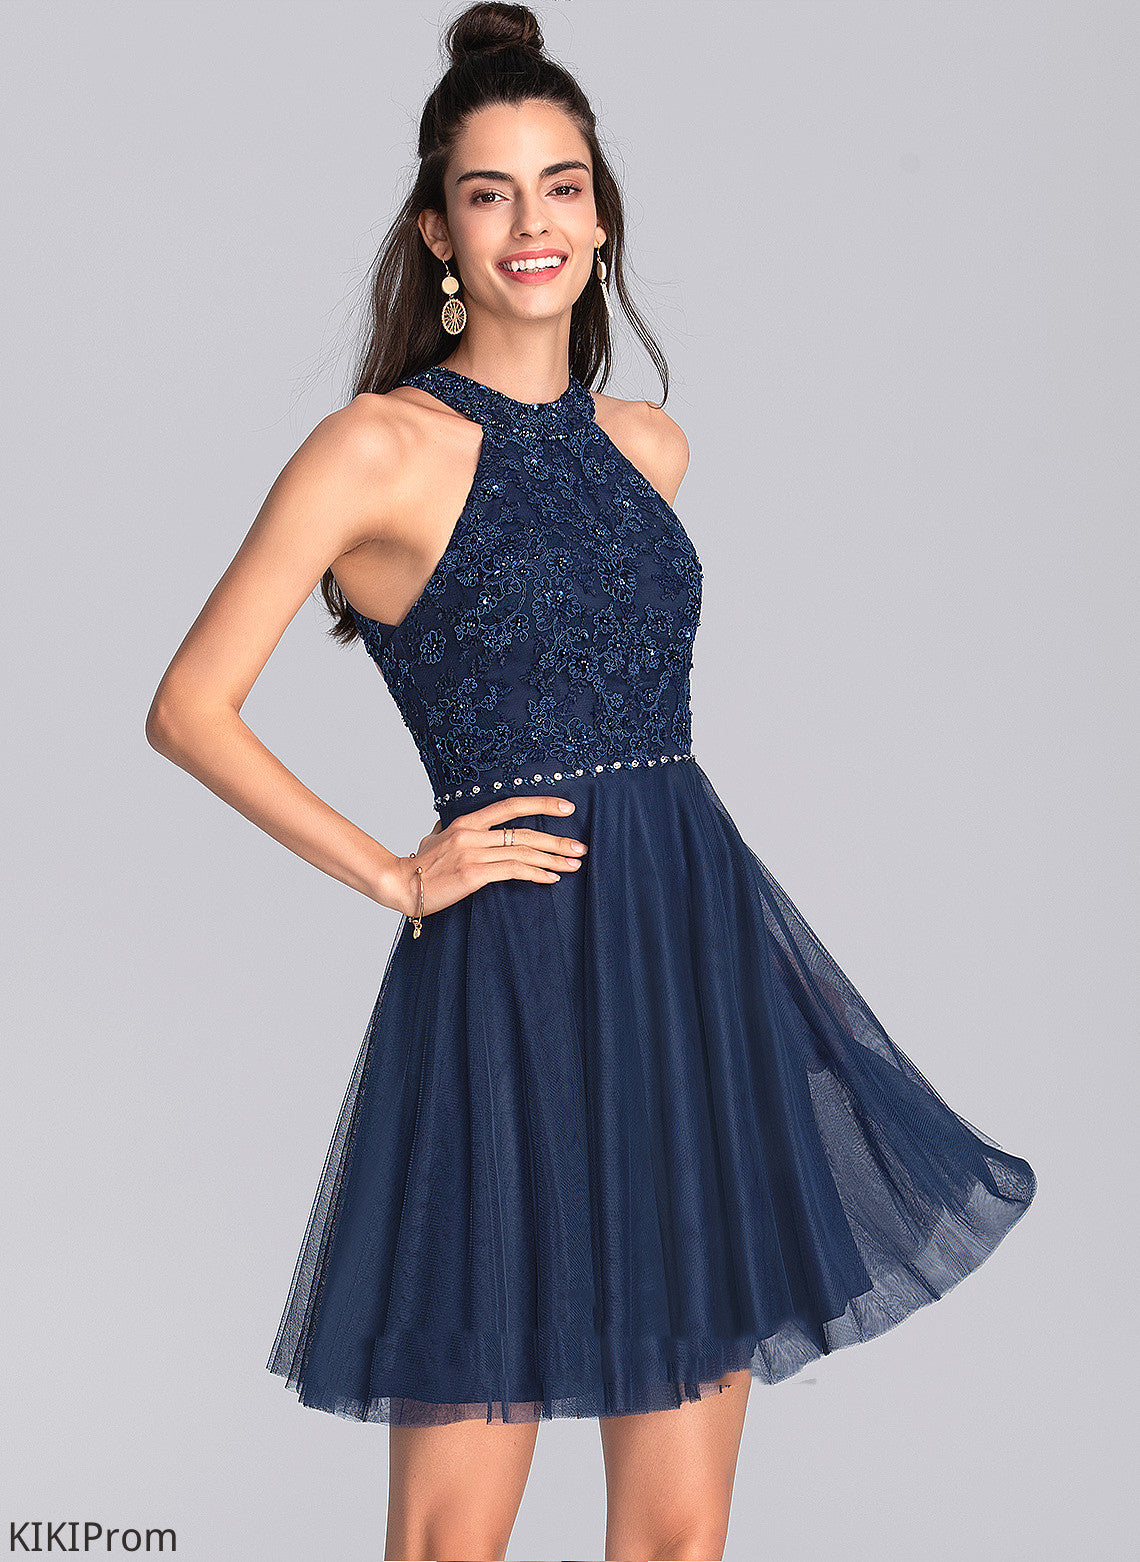 Homecoming With Homecoming Dresses A-Line Short/Mini Lace Willow Scoop Beading Neck Dress Tulle